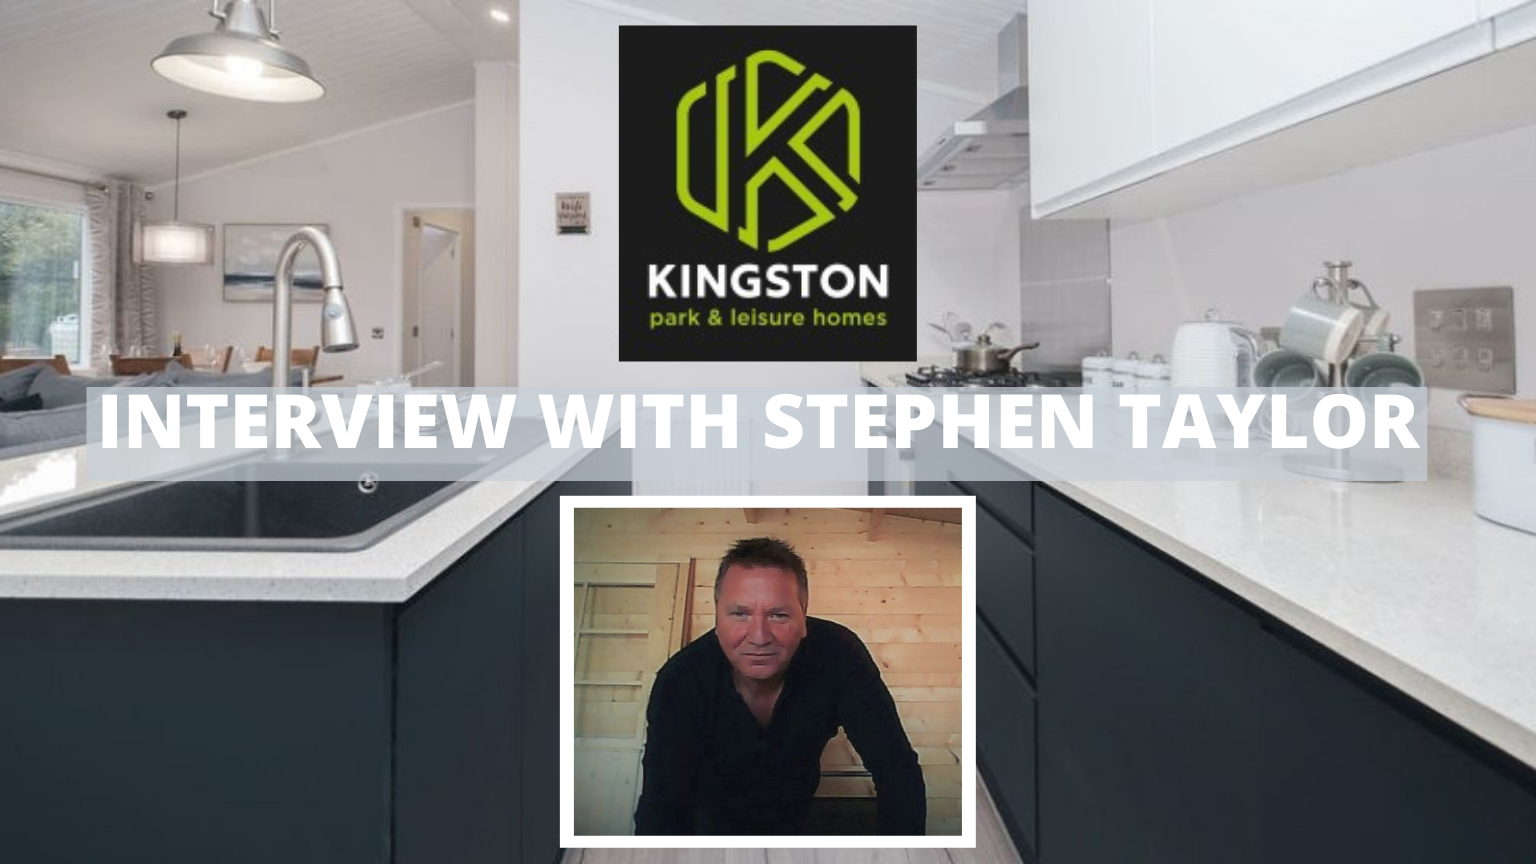 Stephen Taylor from Kingston Park and Leisure Homes